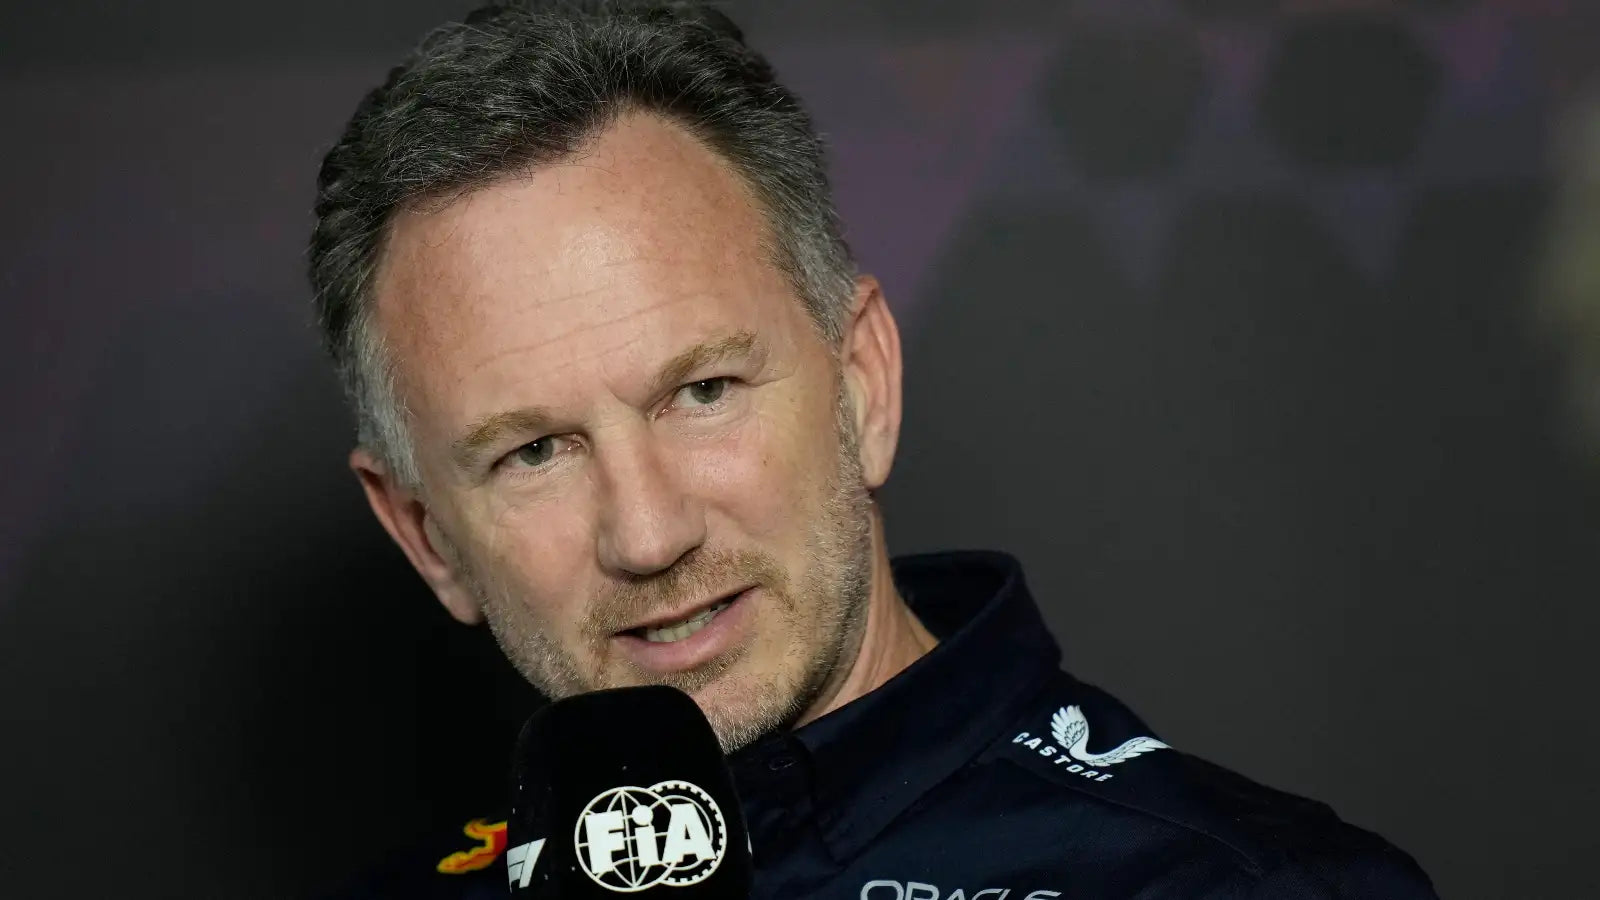 Every word Christian Horner said in fiery press conference